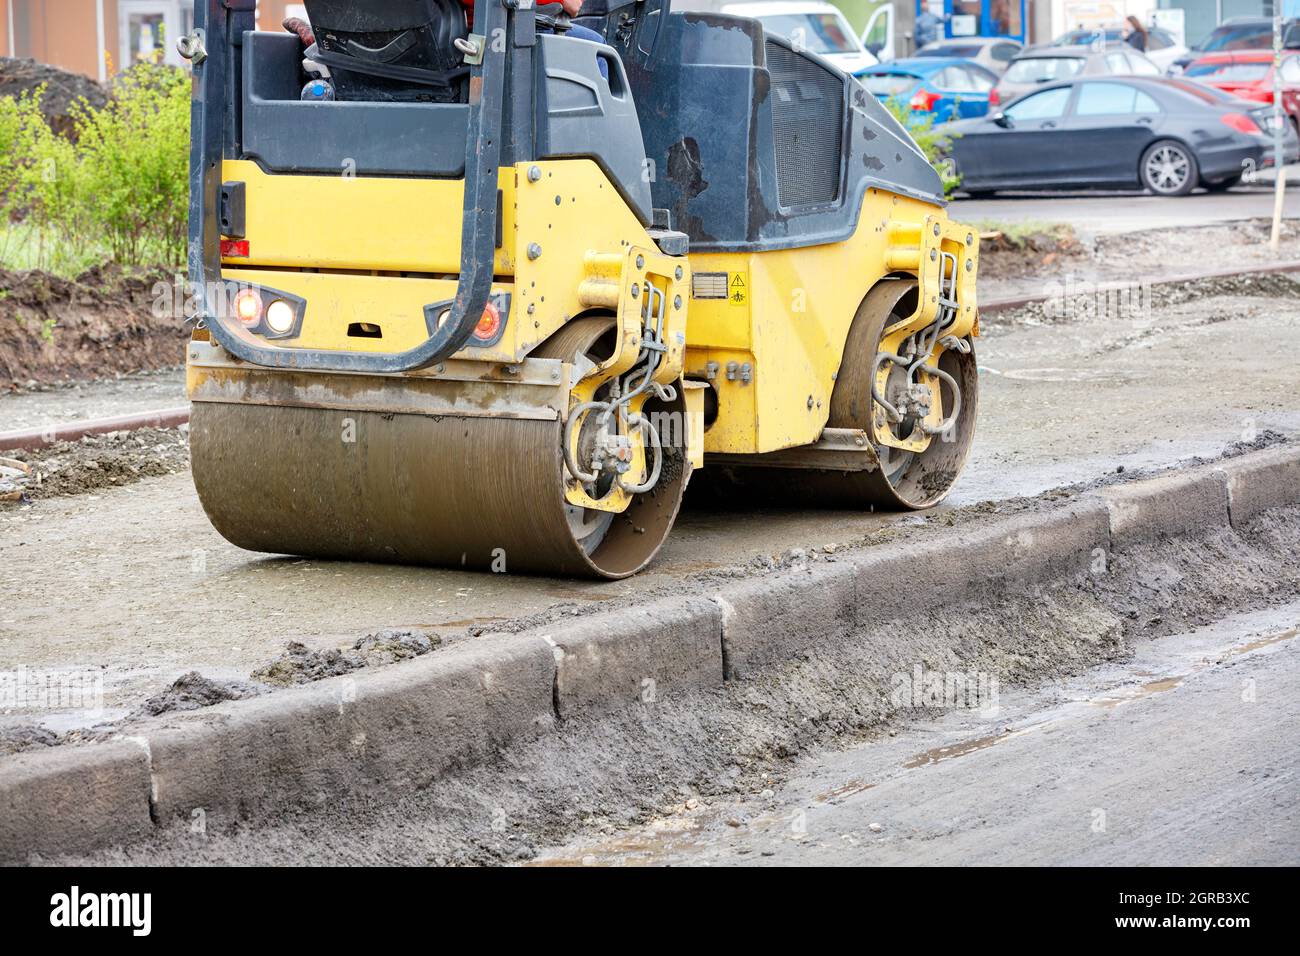 A Yellow Road Roller Tamping The Foundation Of A Sidewalk At A Construction  Site Stock Photo - Alamy